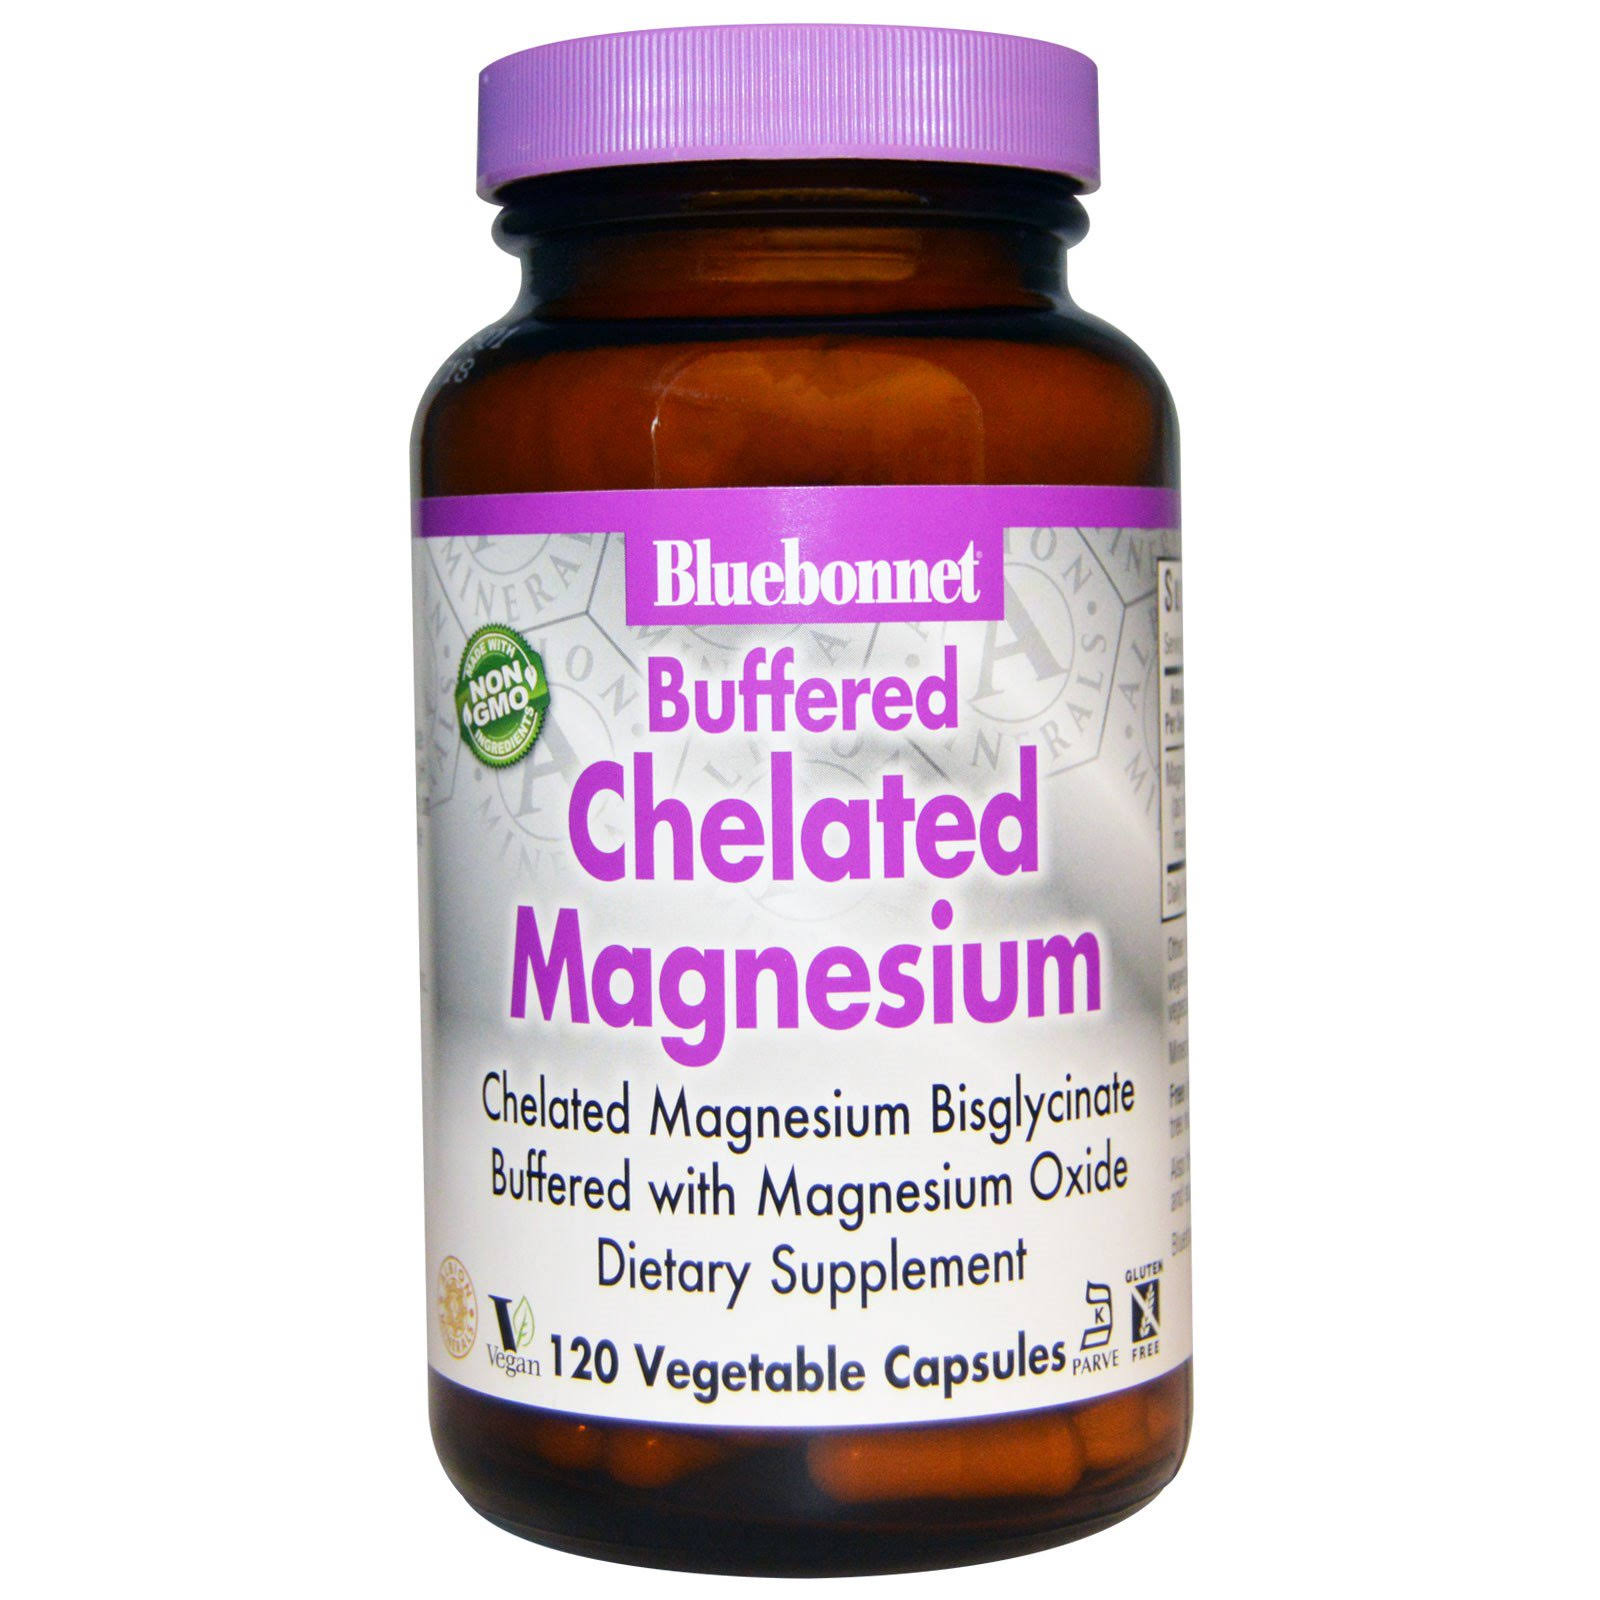 Bluebonnet Nutrition Buffered Chelated Magnesium - 120 Vegetable Capsules